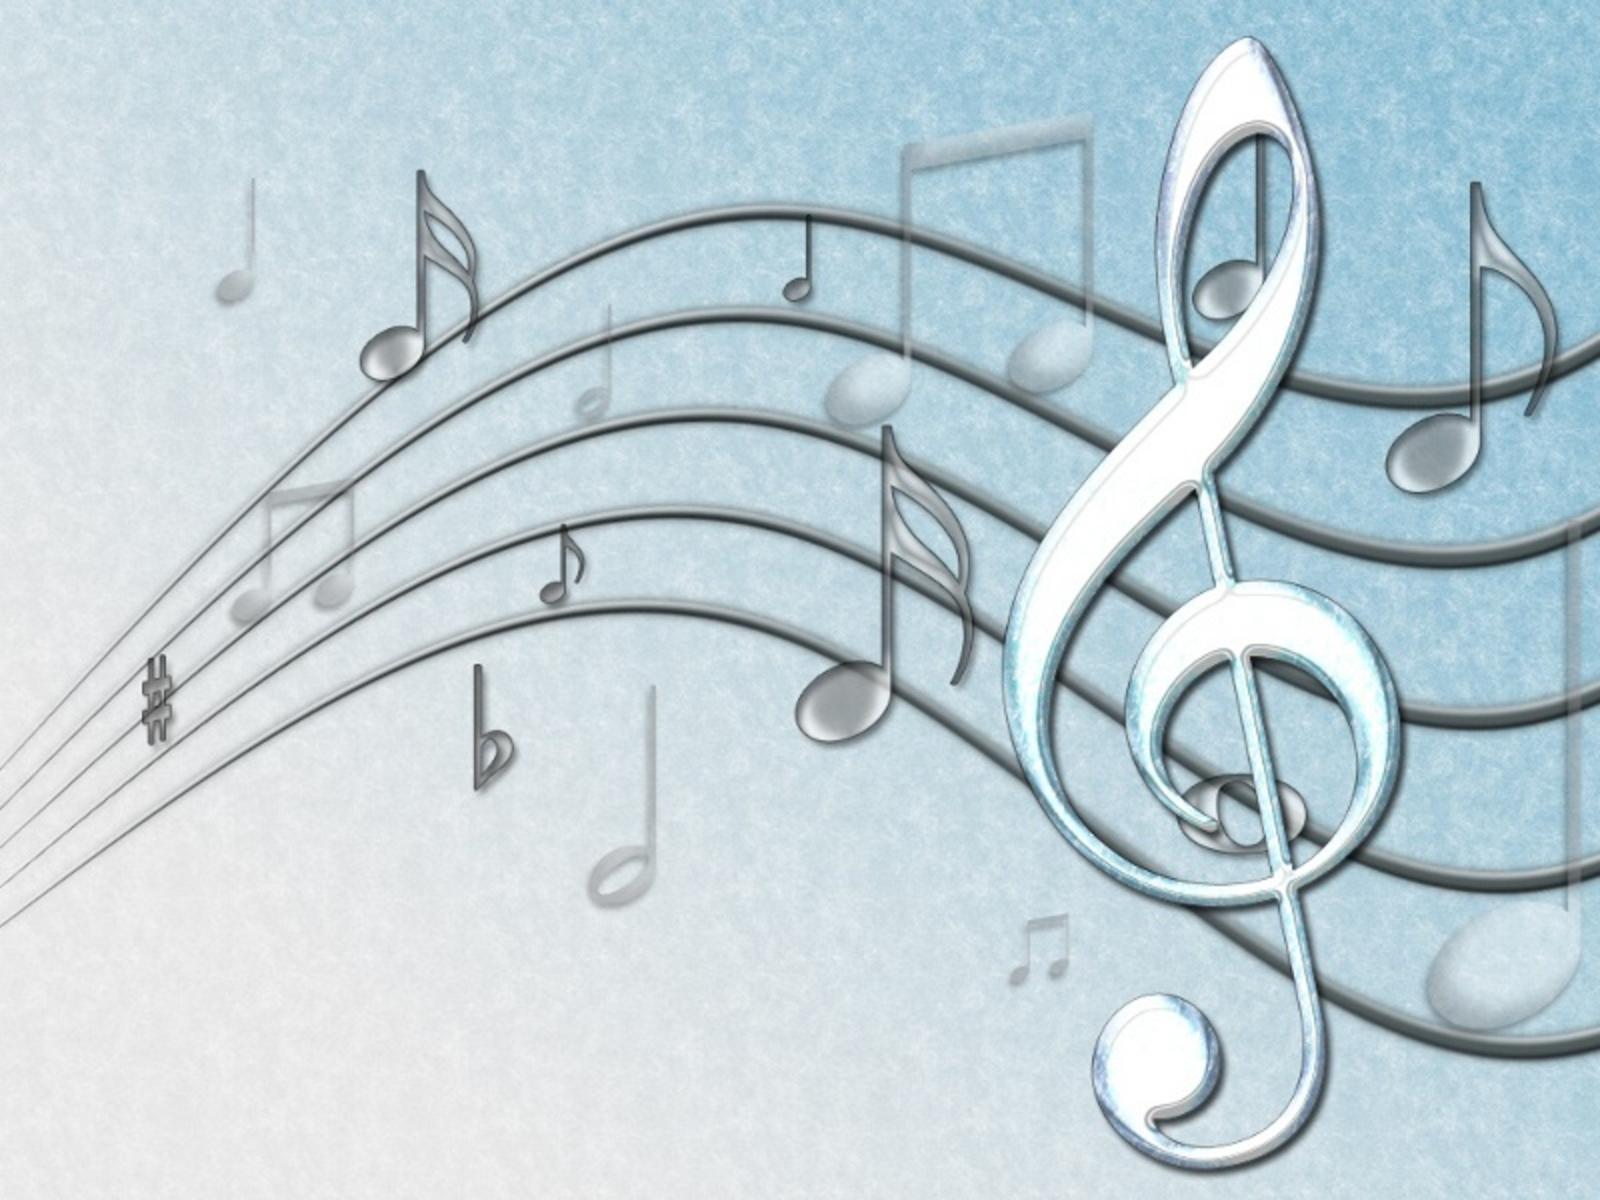 Music Notes Wallpaper Hd Wallpapers in Music Imagescicom